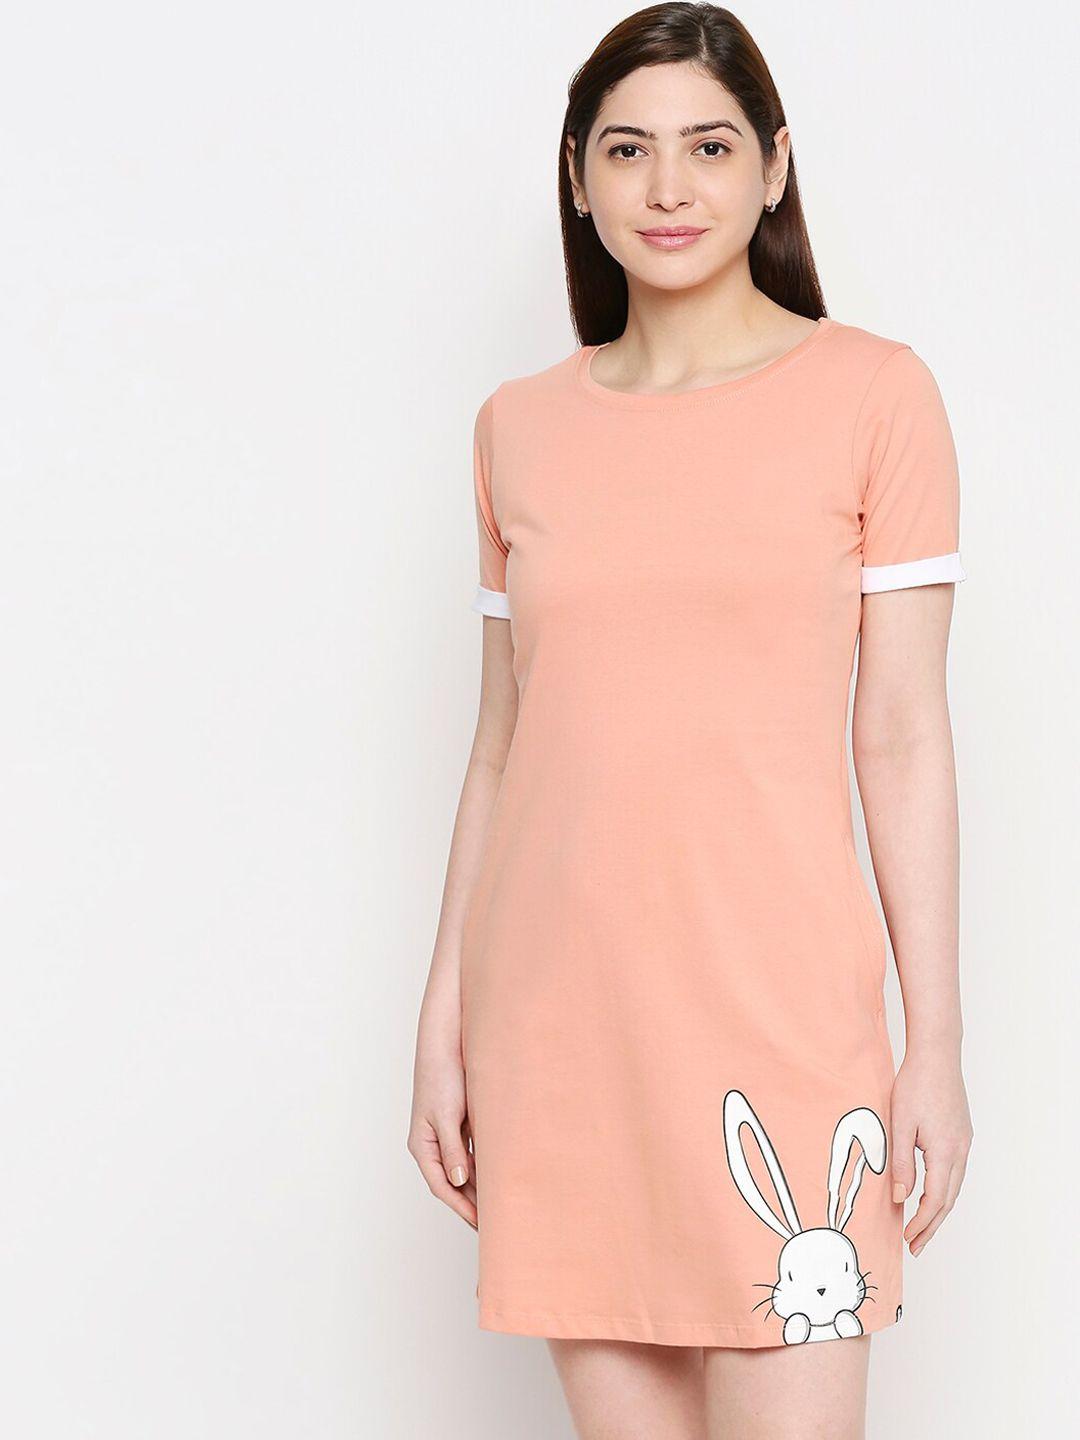 the souled store women pink solid a-line dress